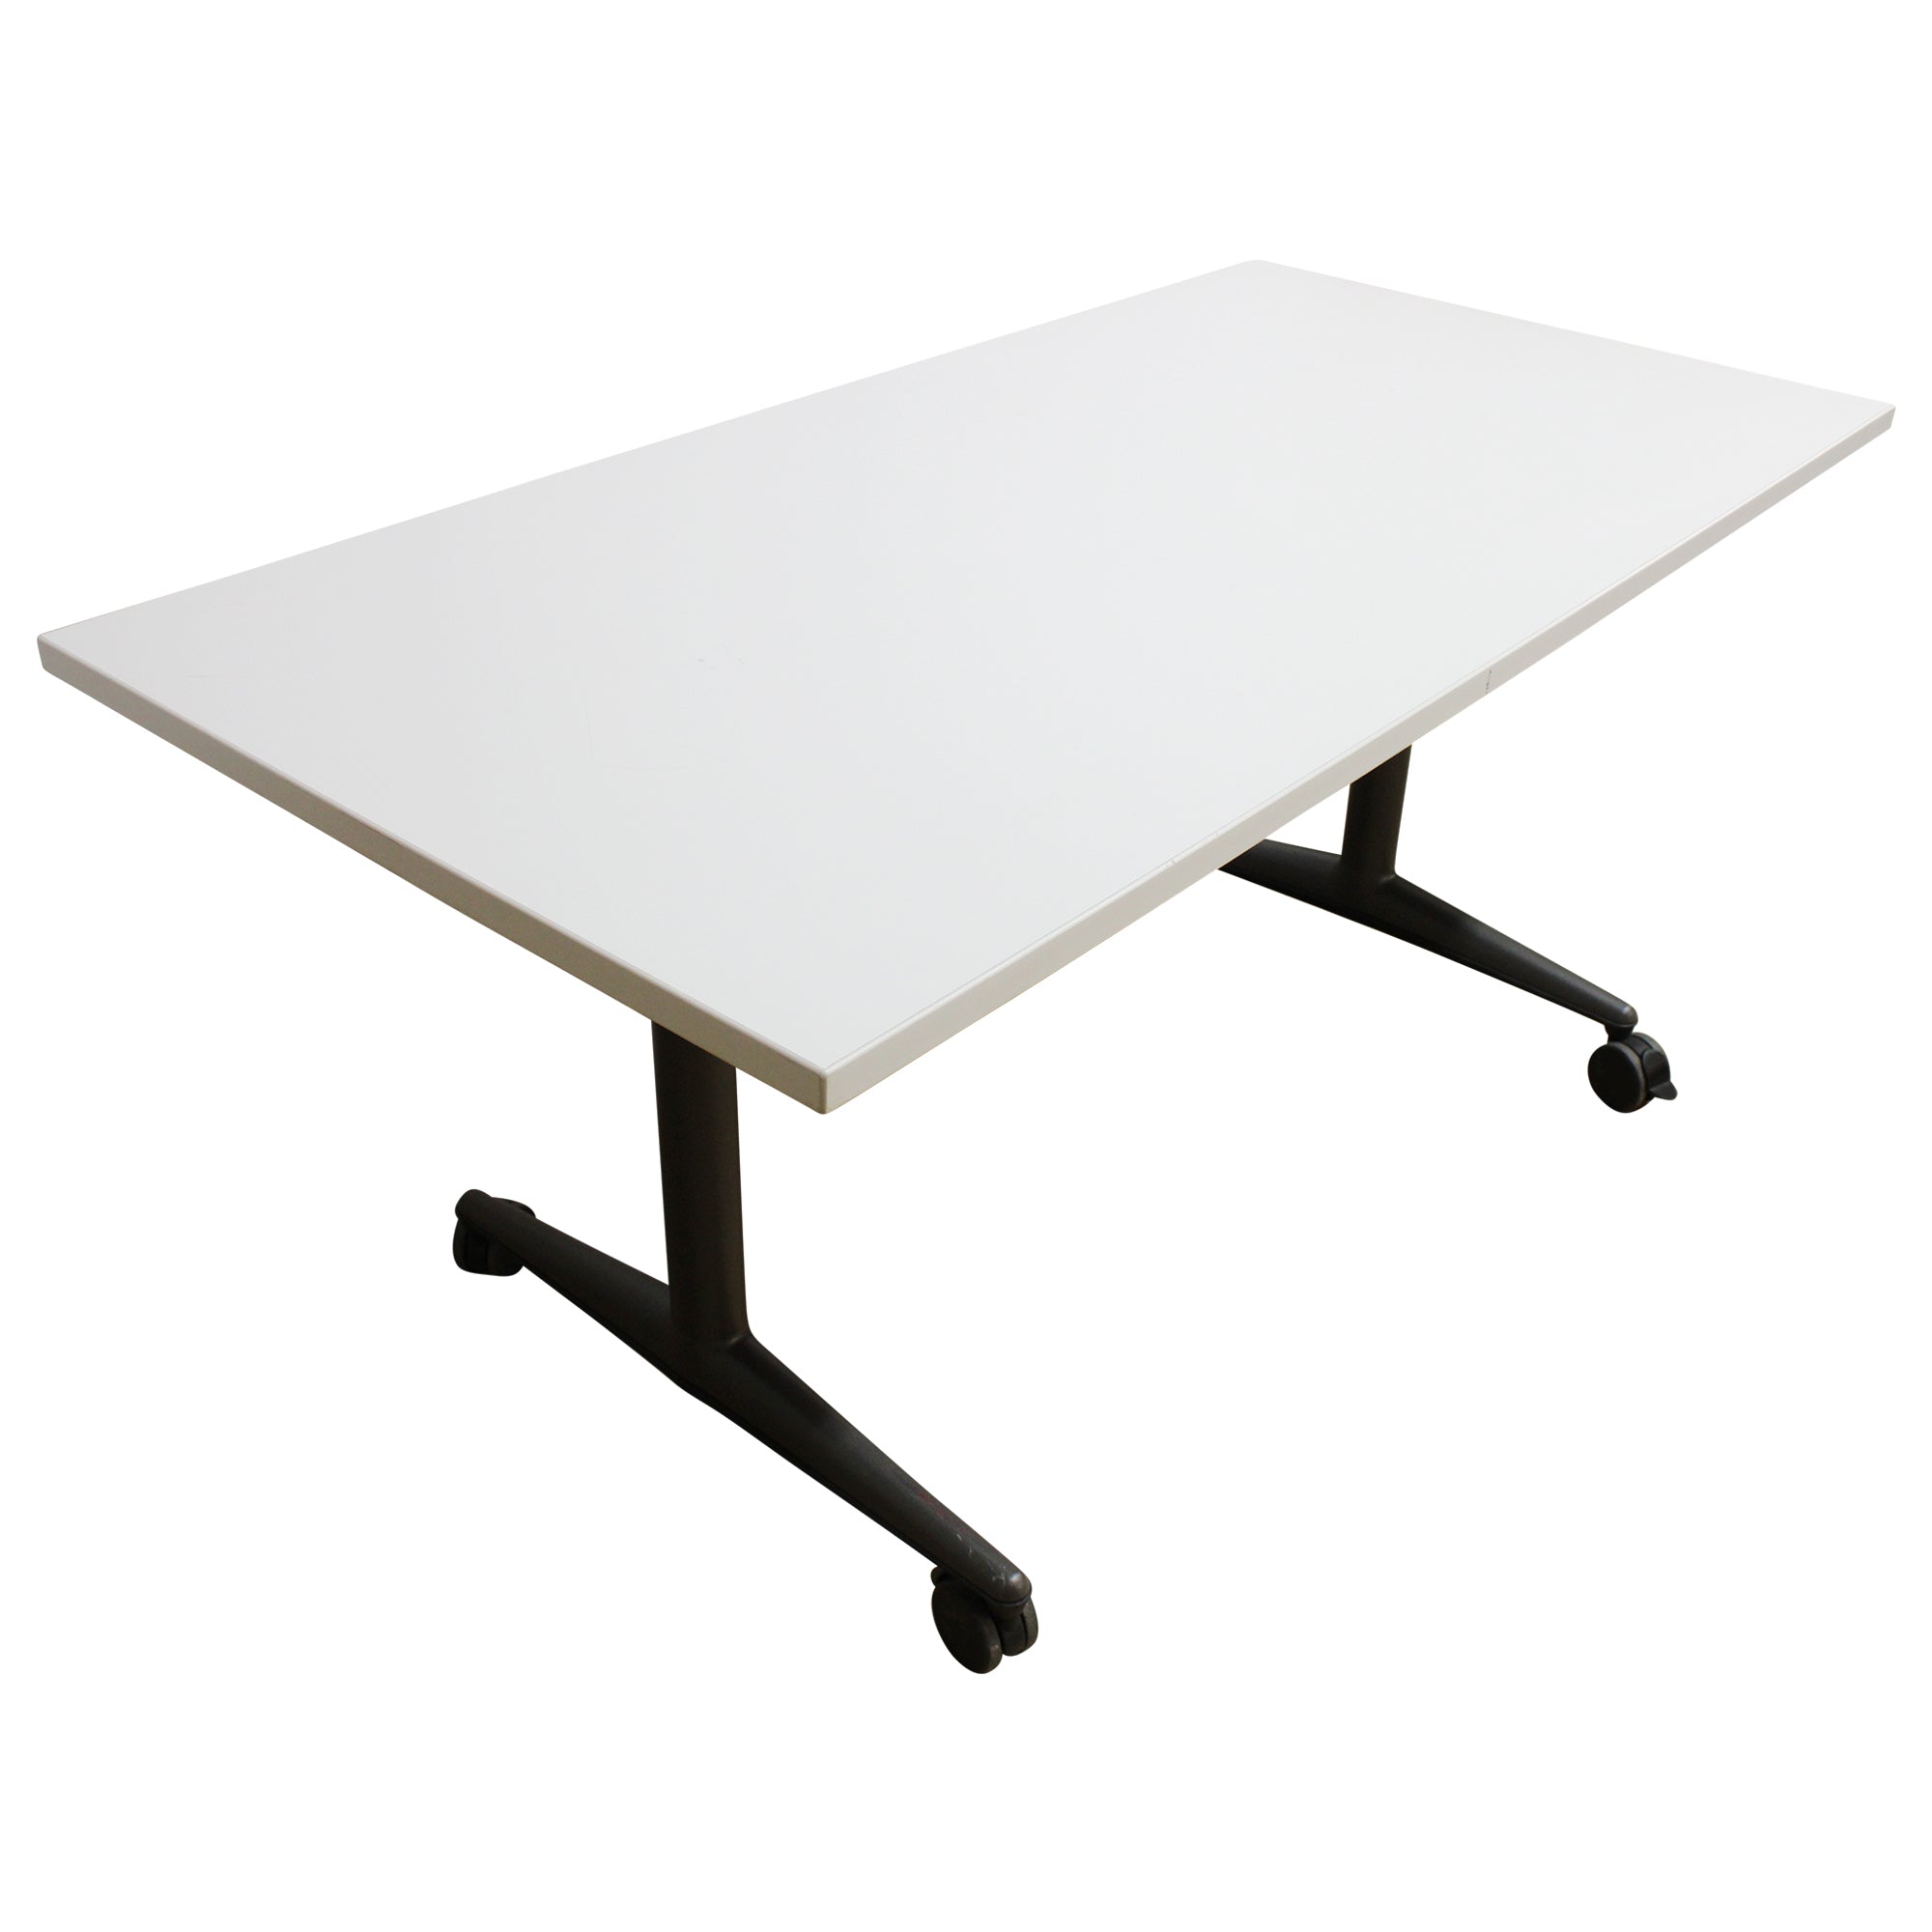 Steelcase Nesting Table, 30 x 60 - Graphite Base - Preowned